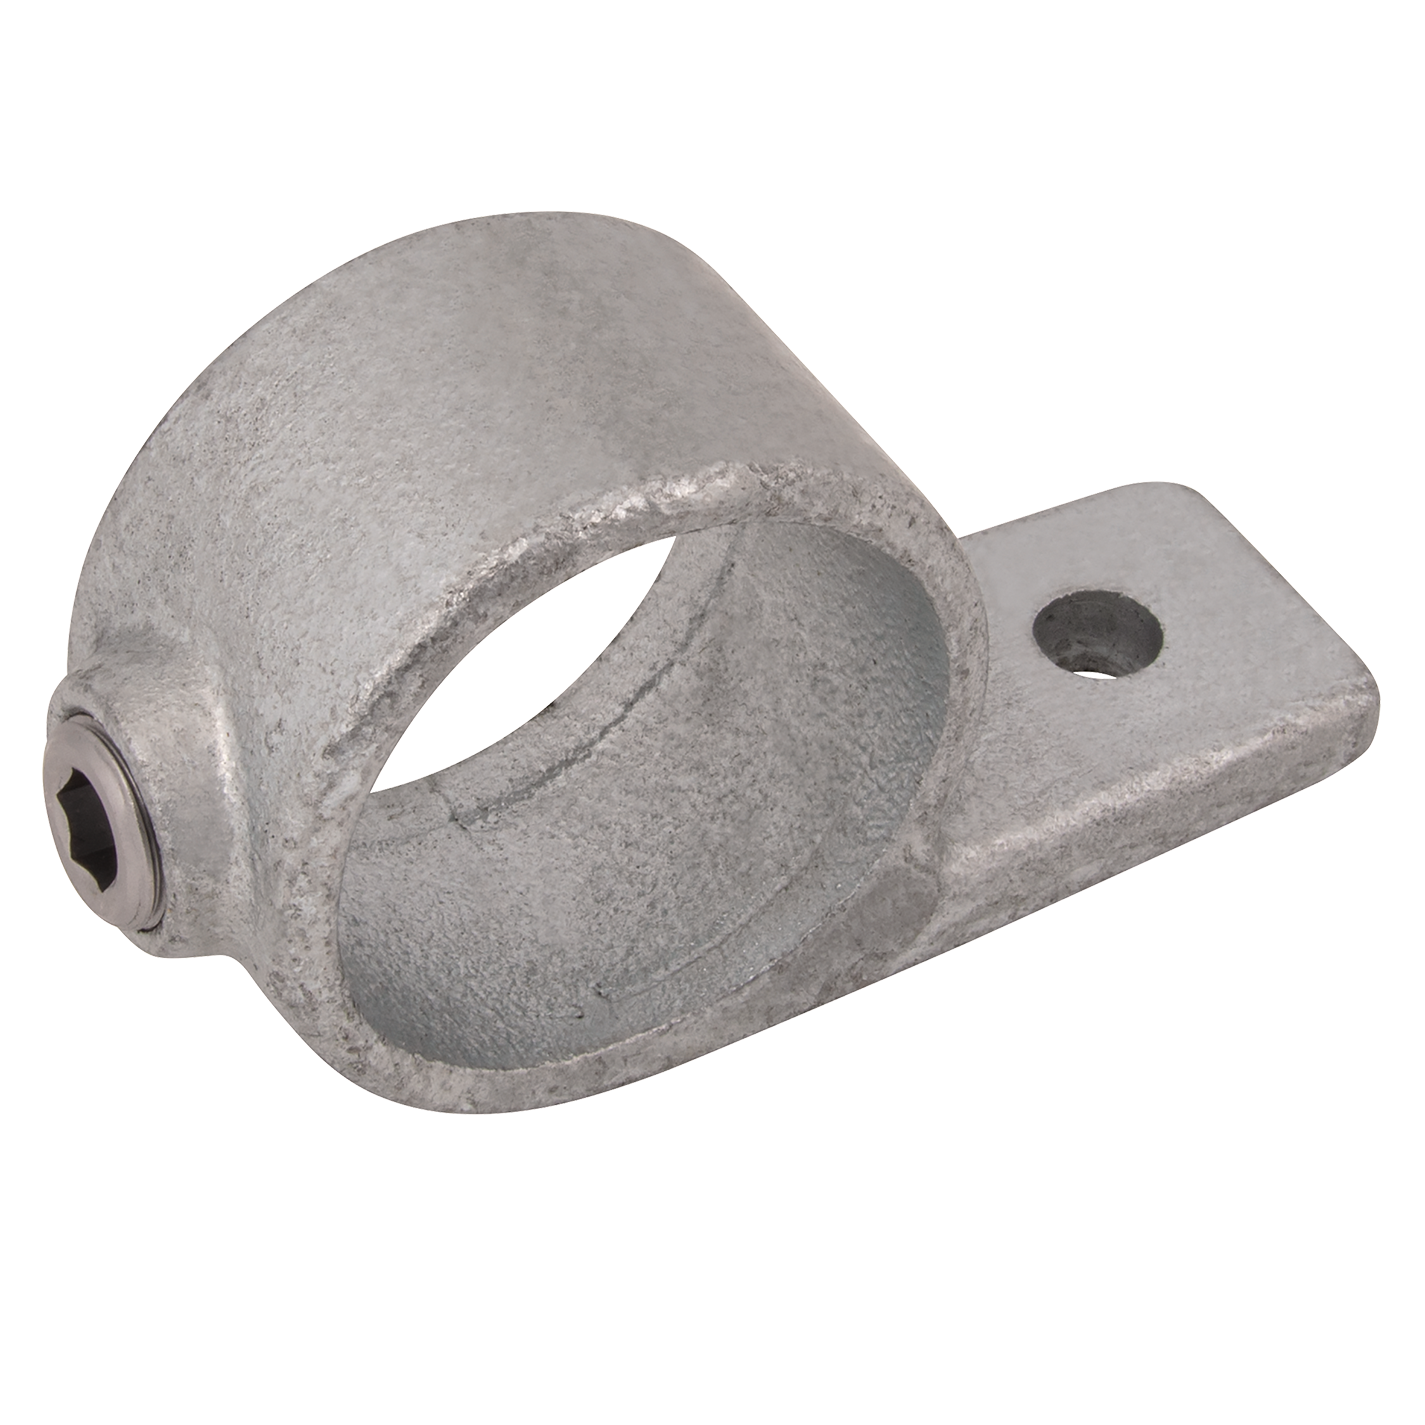 SINGLE PIPE CLAMP (199) SIZE 3